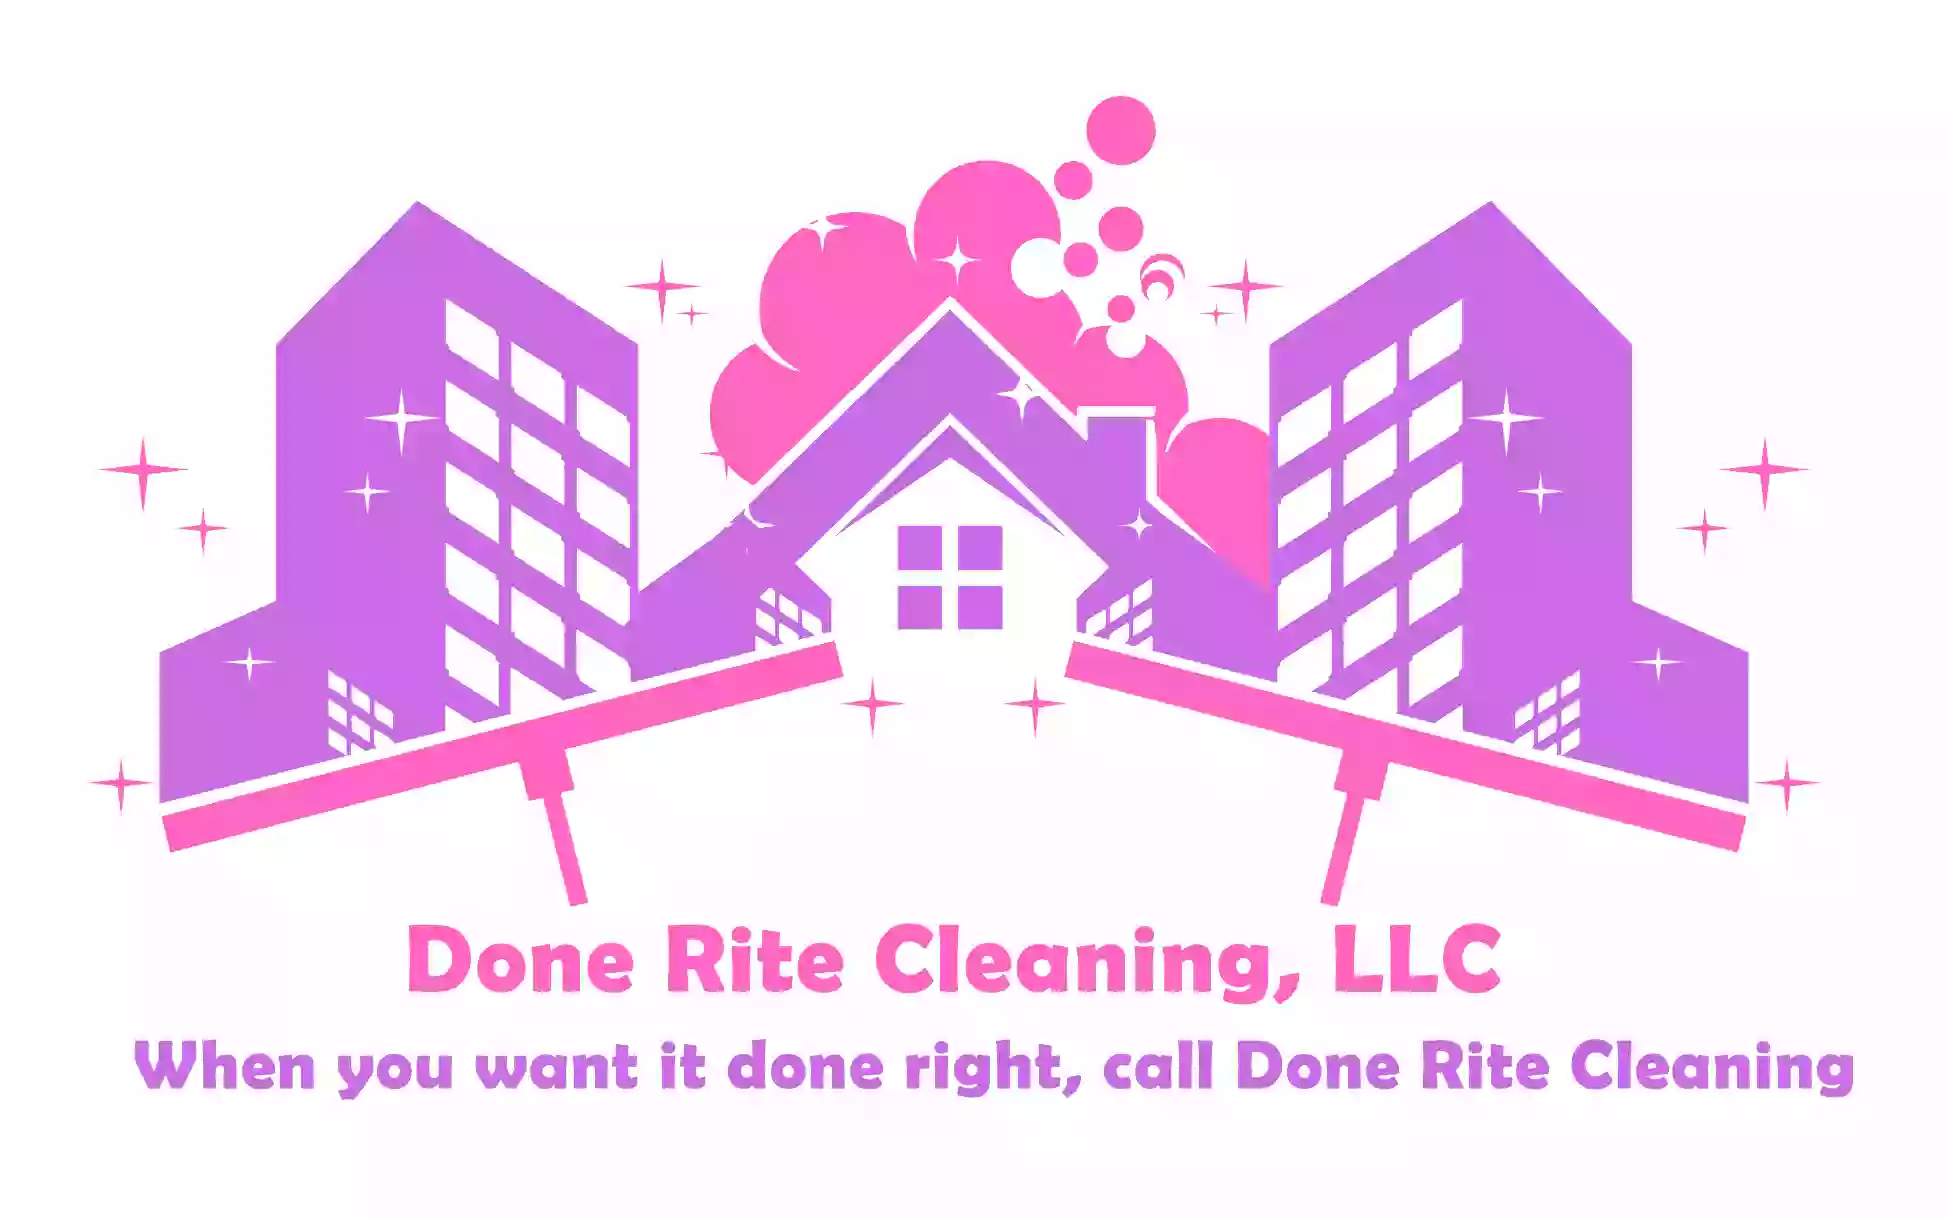 Done Rite Cleaning, LLC